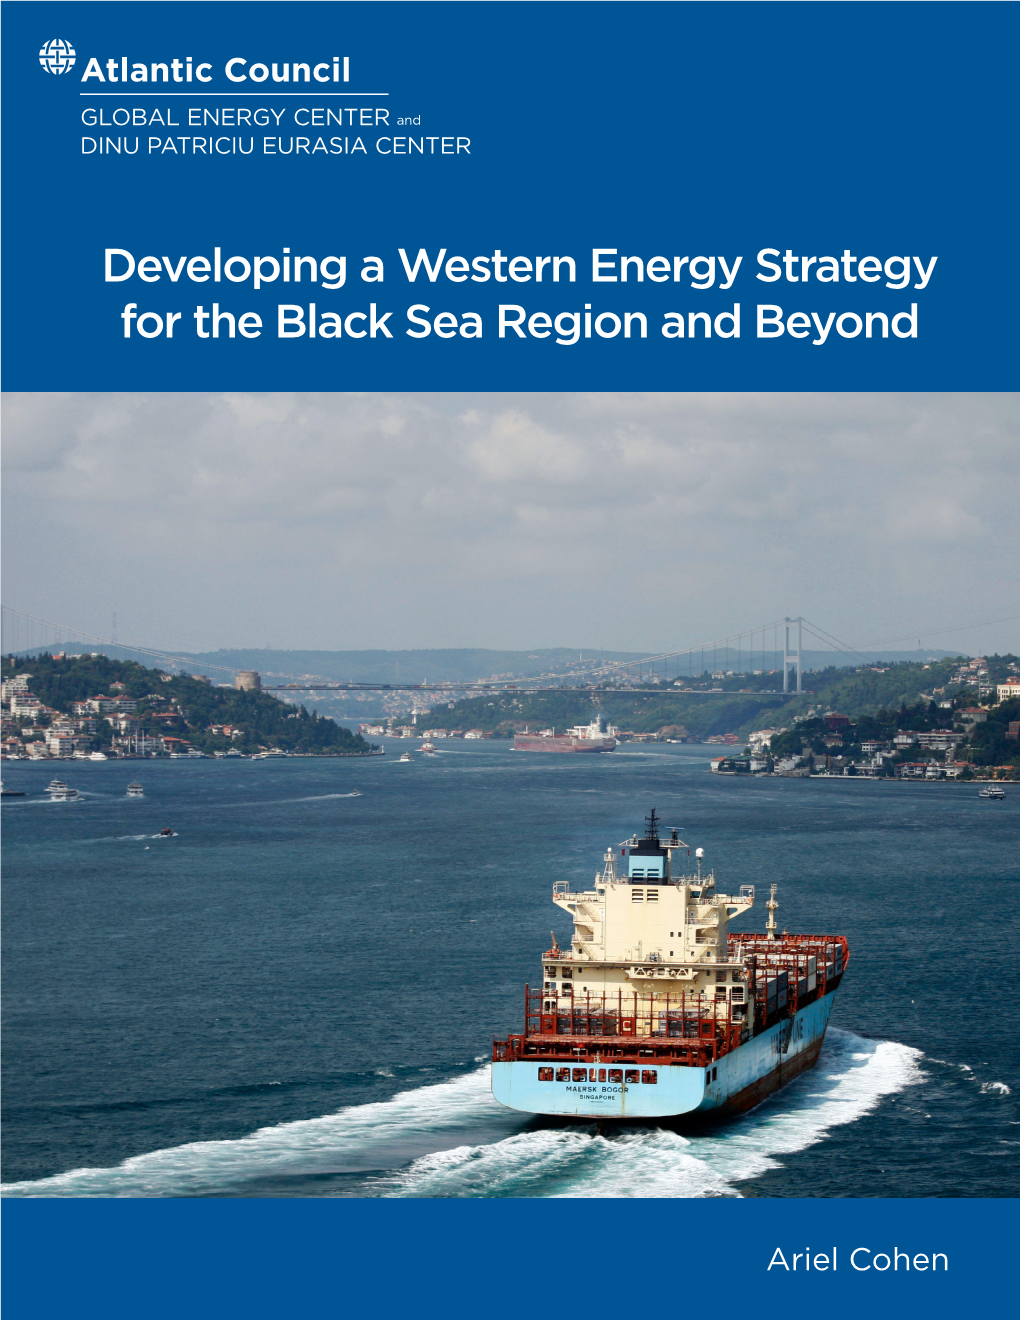 Developing a Western Energy Strategy for the Black Sea Region and Beyond